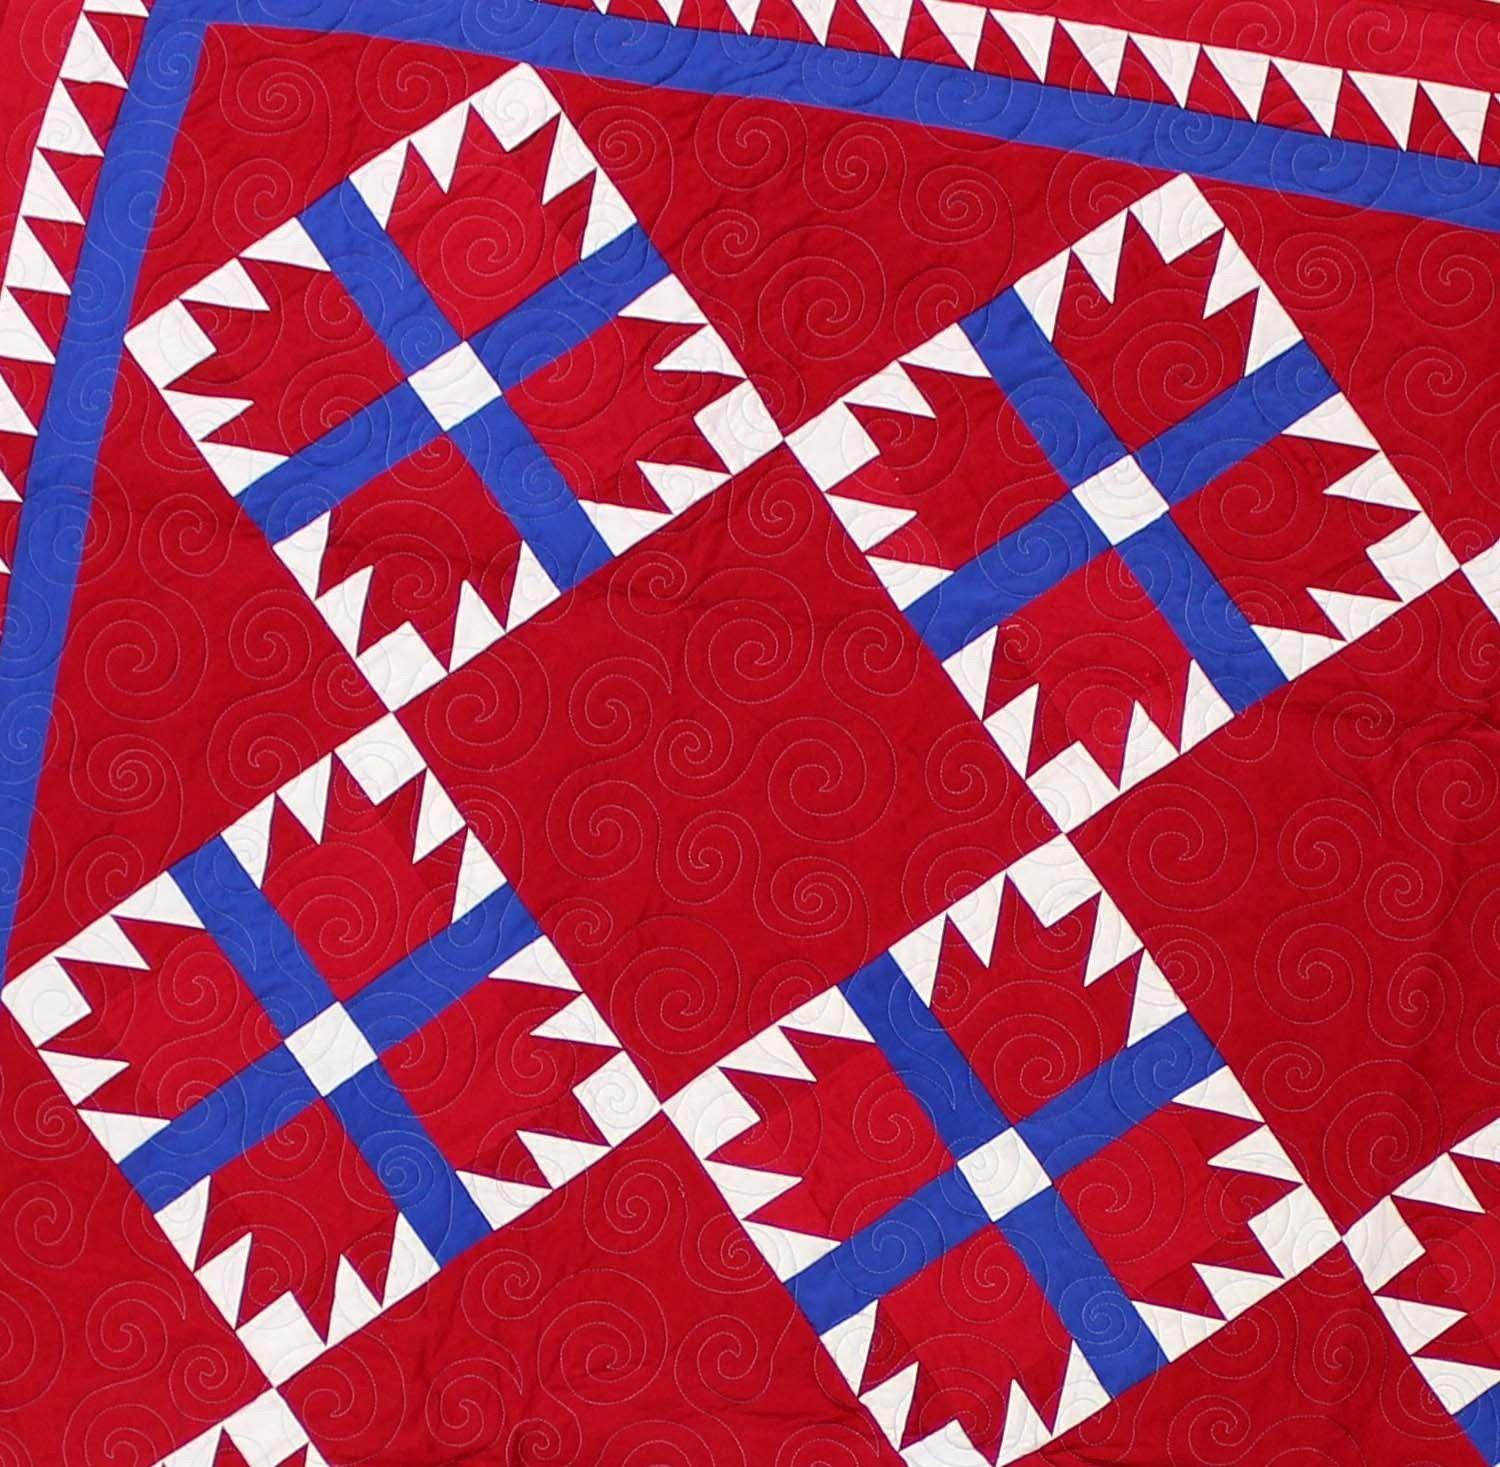 Blue Bear Paw Logo - Amish styled Red, White and Blue Bear Paw FINISHED QUILT